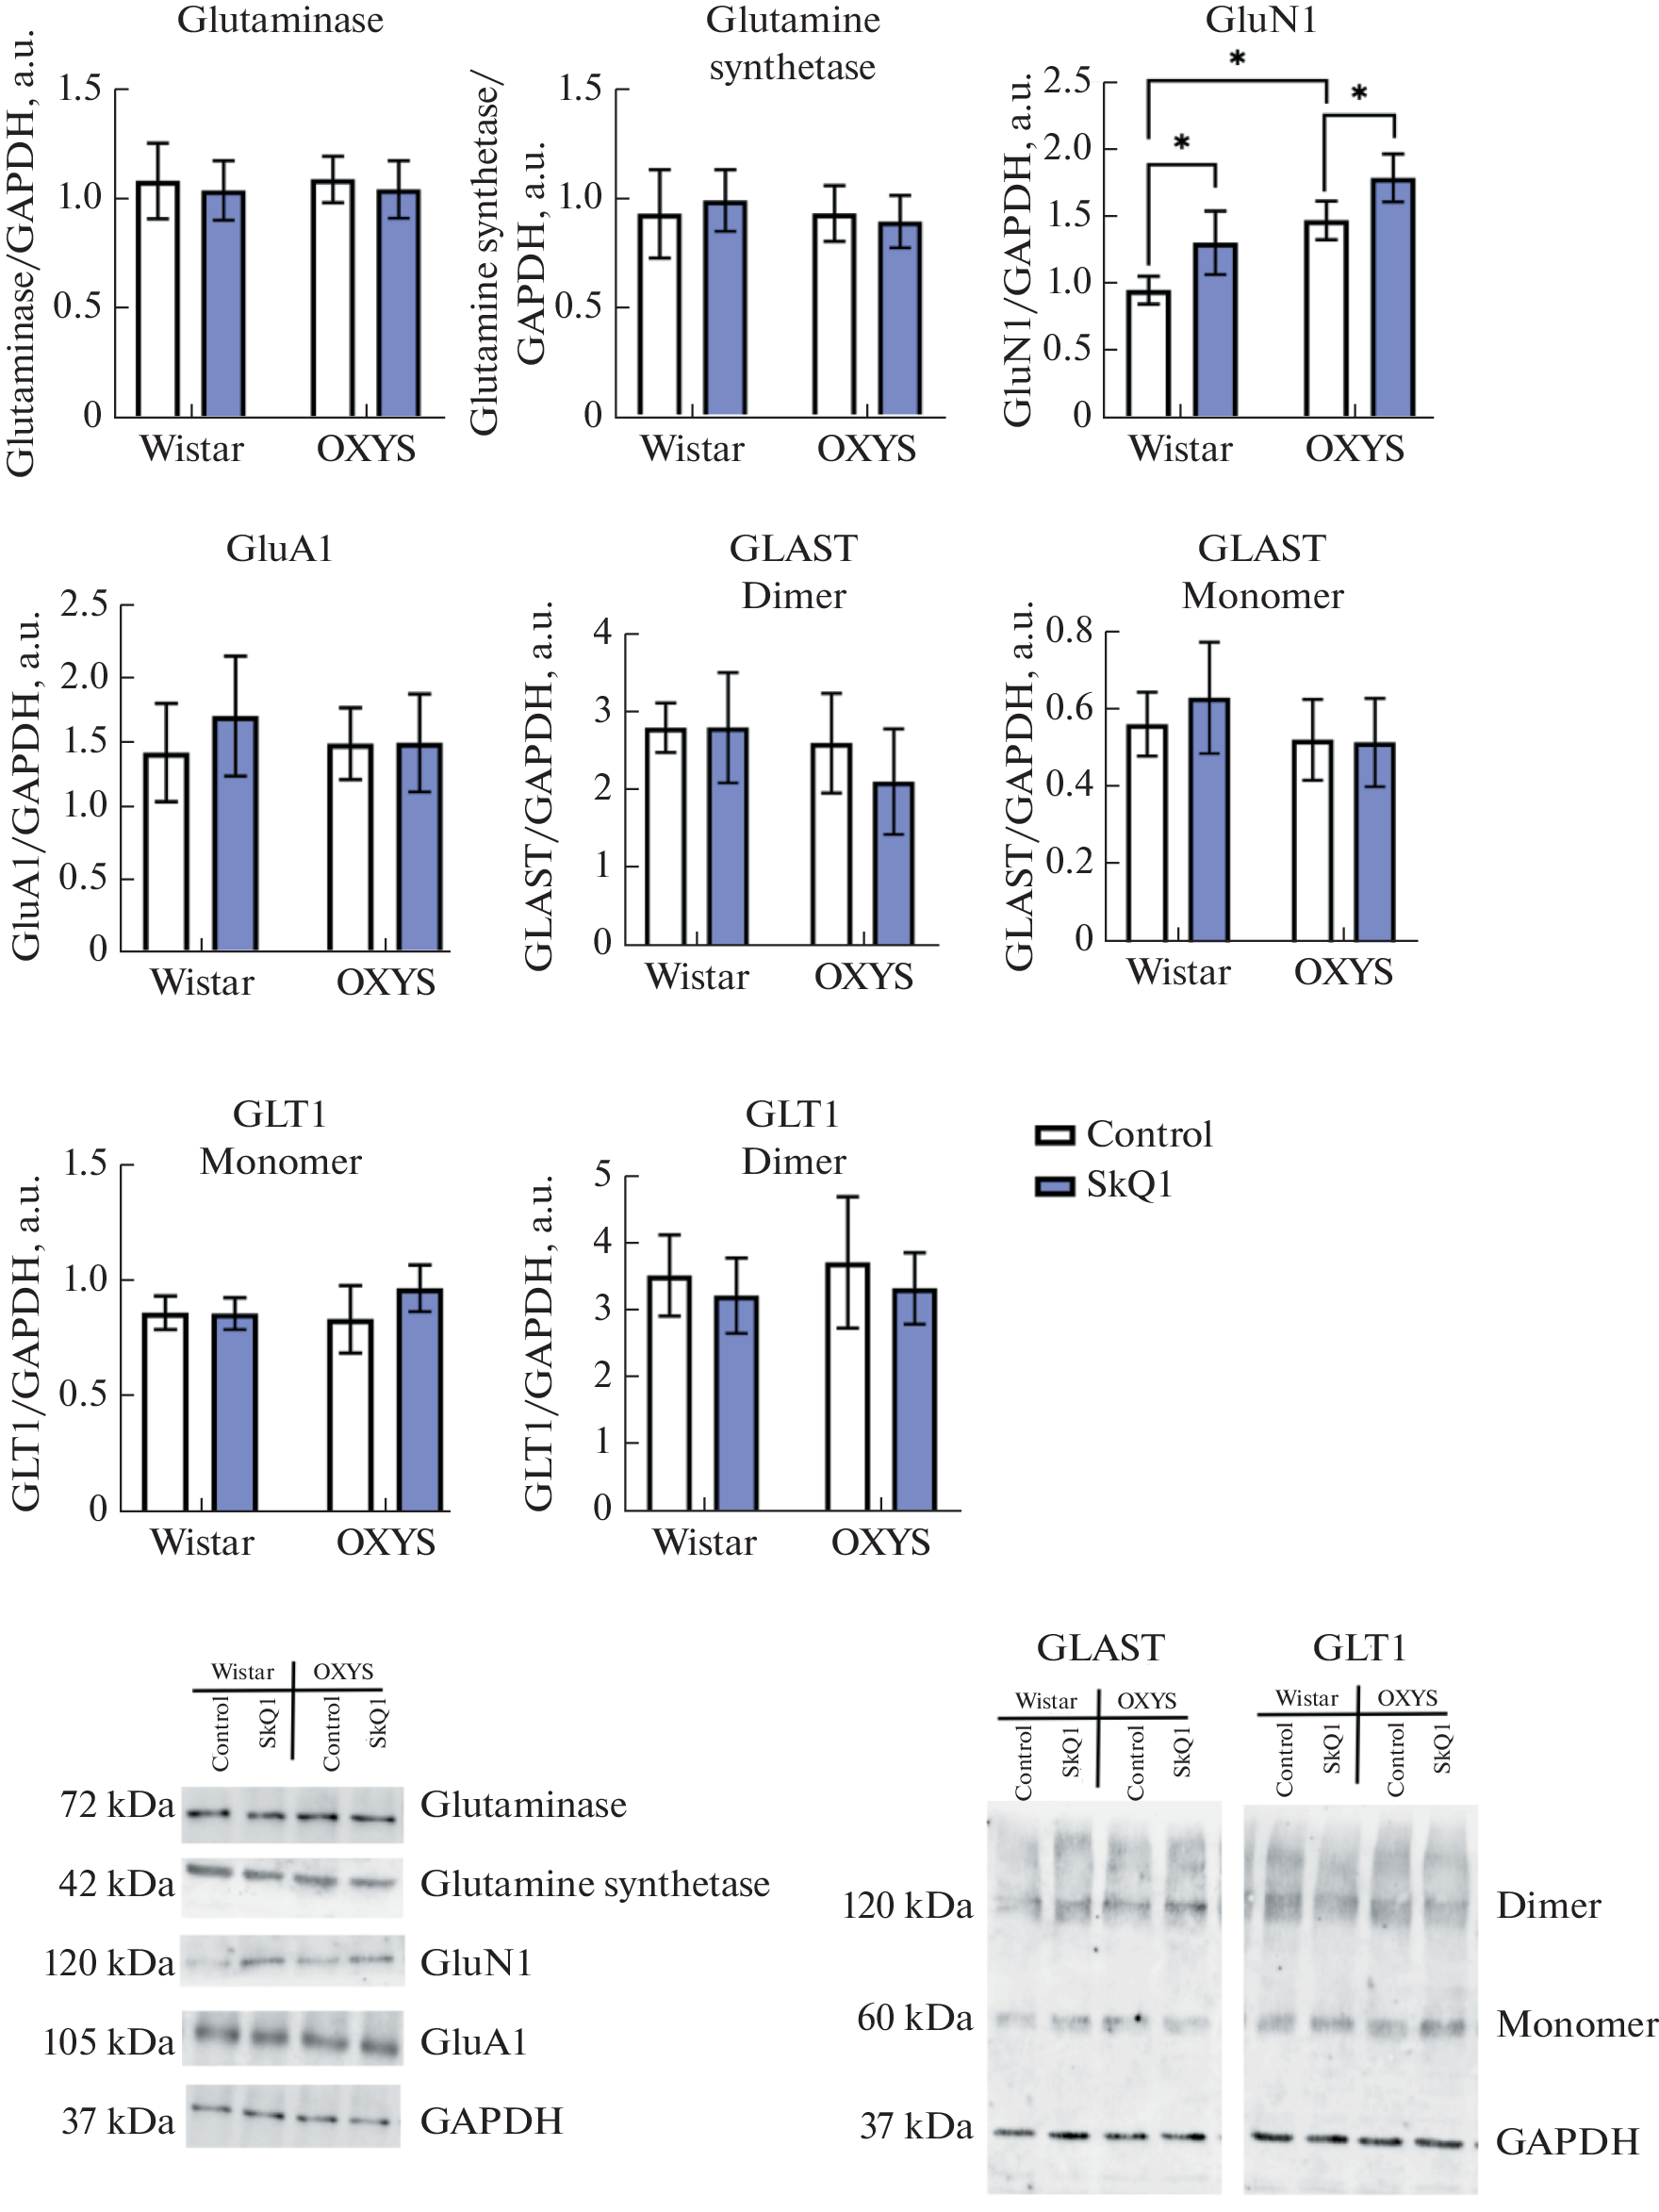 Mitochondrial Antioxidant SkQ1 Affects the GABAergic but Not the Glutamatergic System in the Hippocampus of Wistar and Senescence Accelerated OXYS Rats